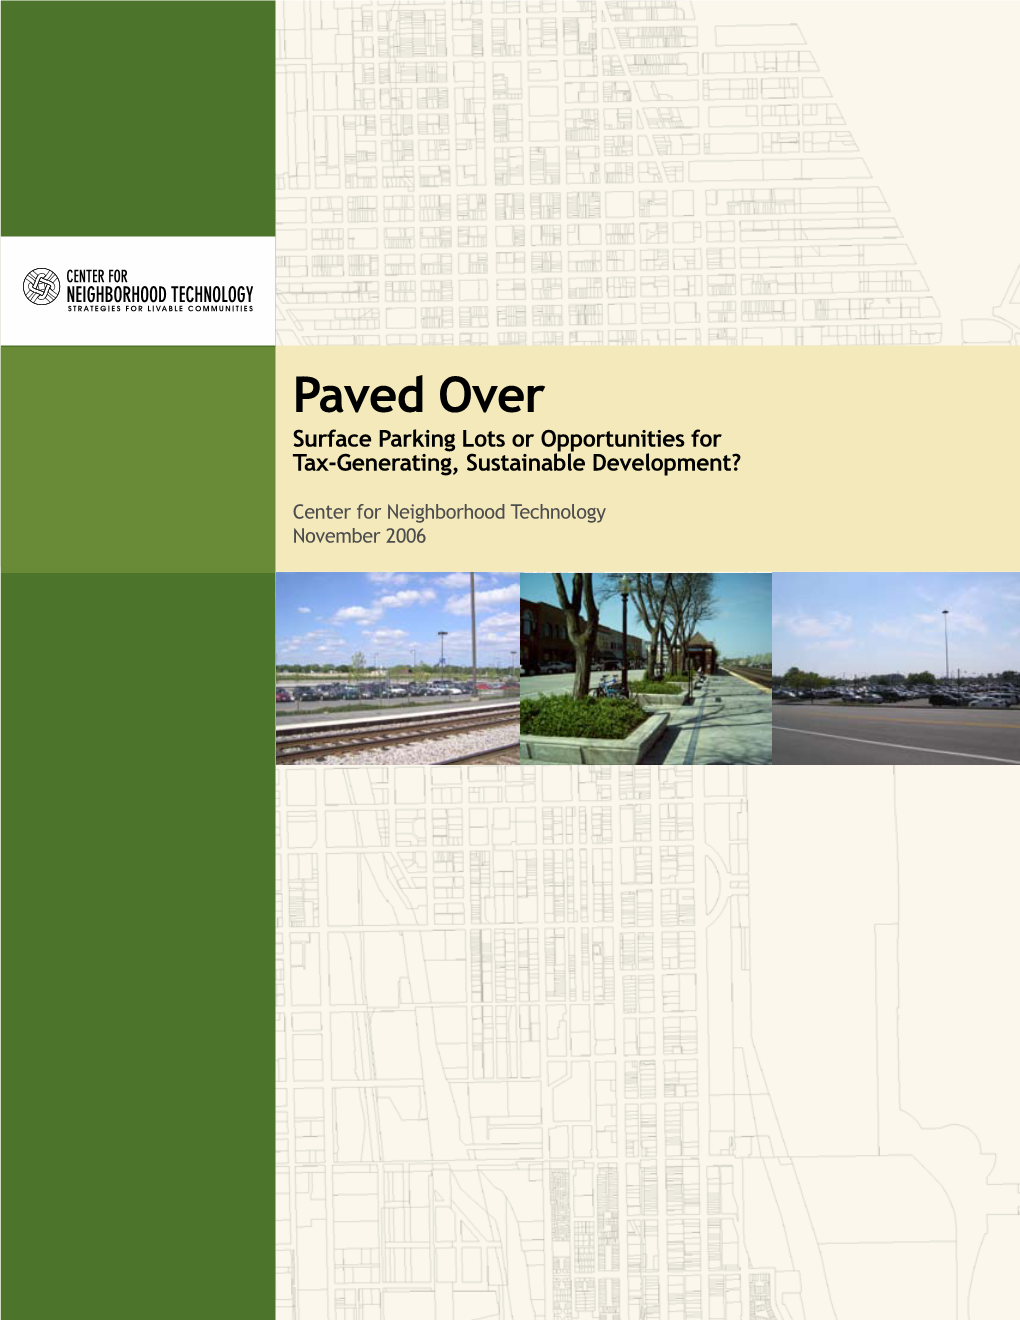 Paved Over Surface Parking Lots Or Opportunities for Tax-Generating, Sustainable Development?